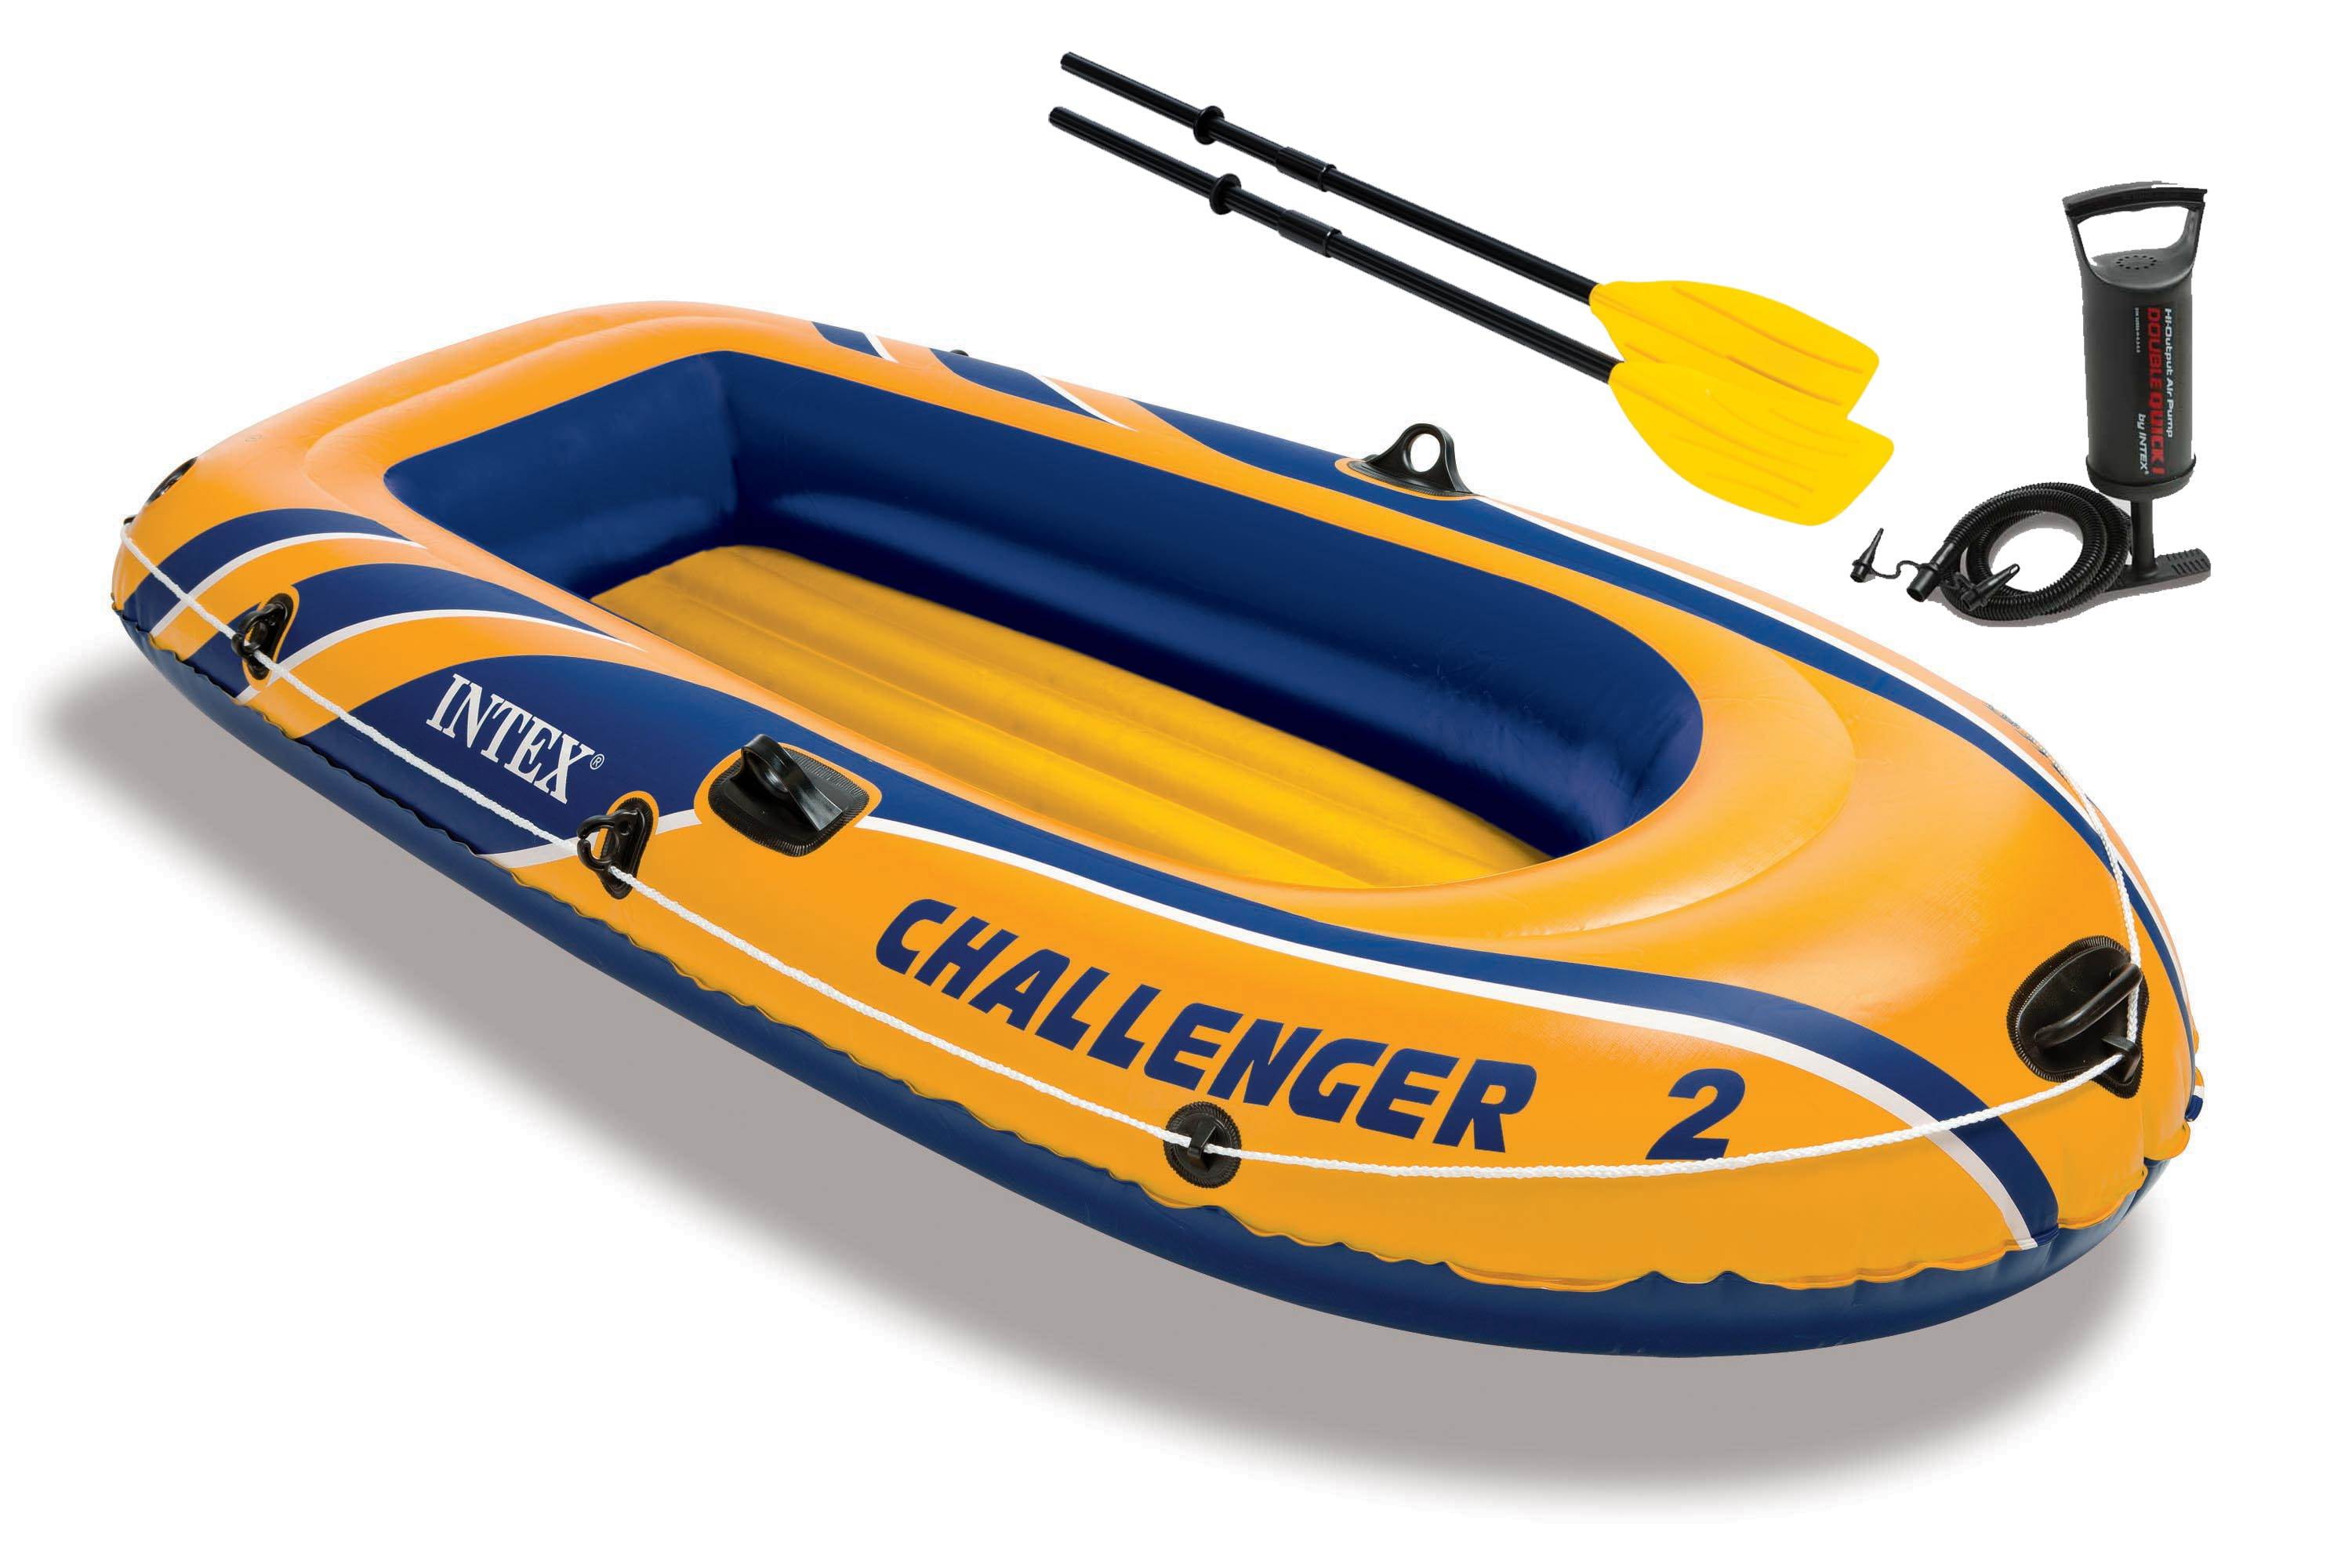 Challenger 2 Person Inflatable Boat 